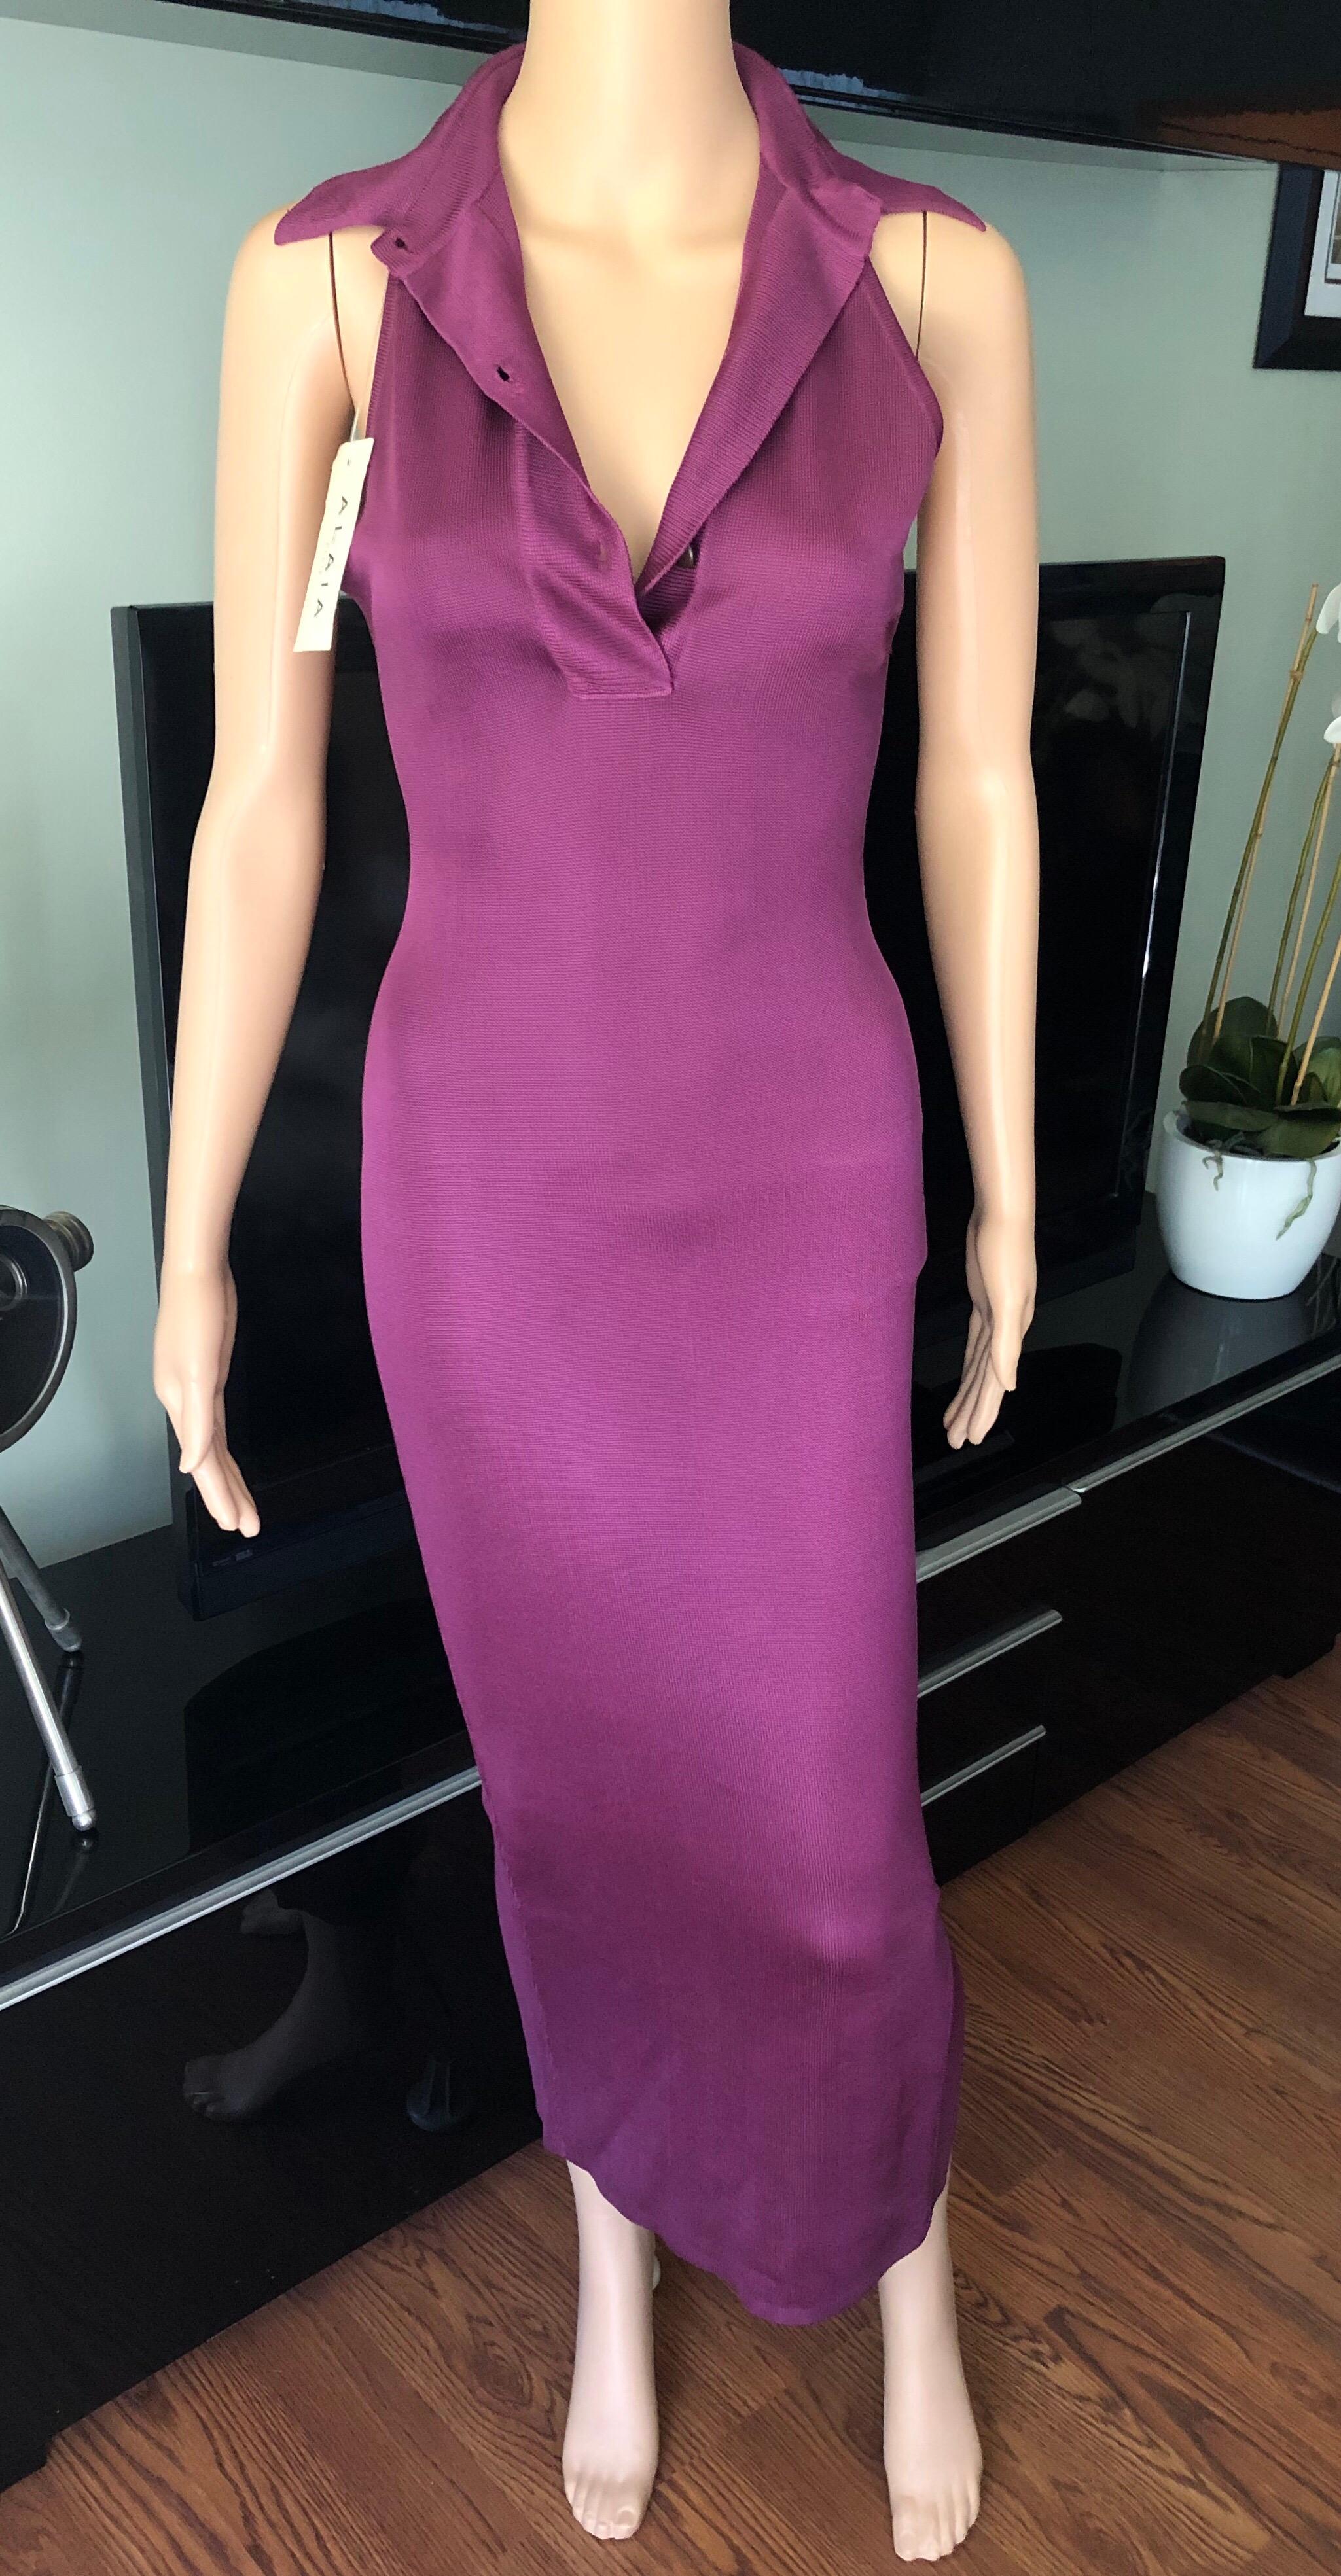 Azzedine Alaia Vintage Bodycon Maxi Dress Size M

Alaïa knit sleeveless dress with pointed collar featuring button closures at center front.

All Eyes on Alaïa

For the last half-century, the world’s most fashionable and adventuresome women have